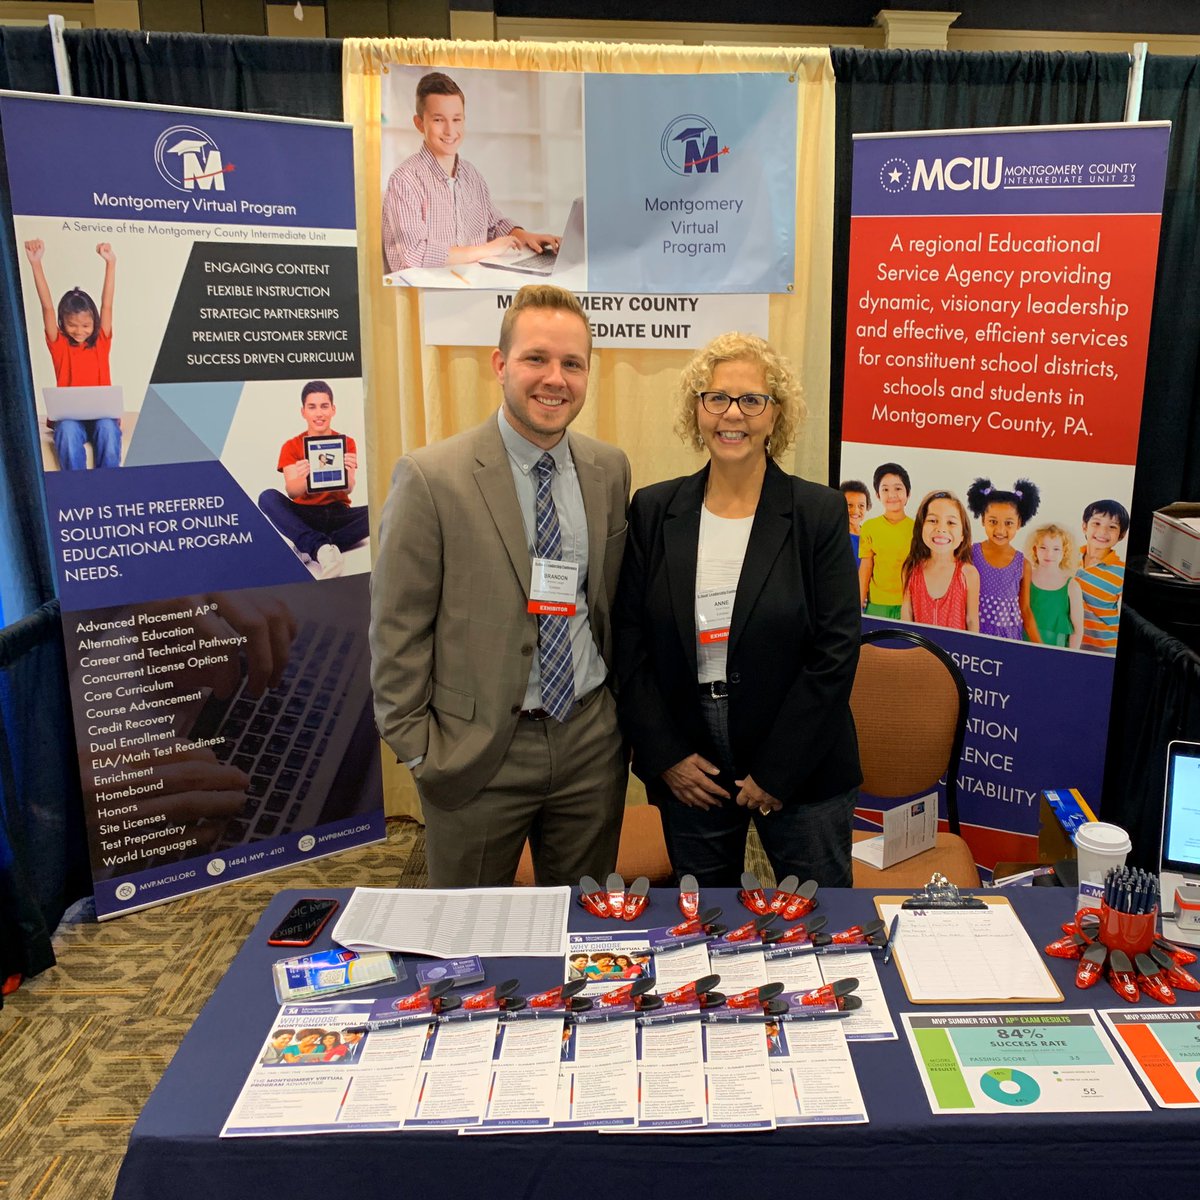 Montgomery Virtual Program is all set for #PaSLC2019. Stop by booth 413 to hear about our program offerings and how we are supporting #personalizedlearning for schools and districts across PA. #mciulearns #PASA #PSBA